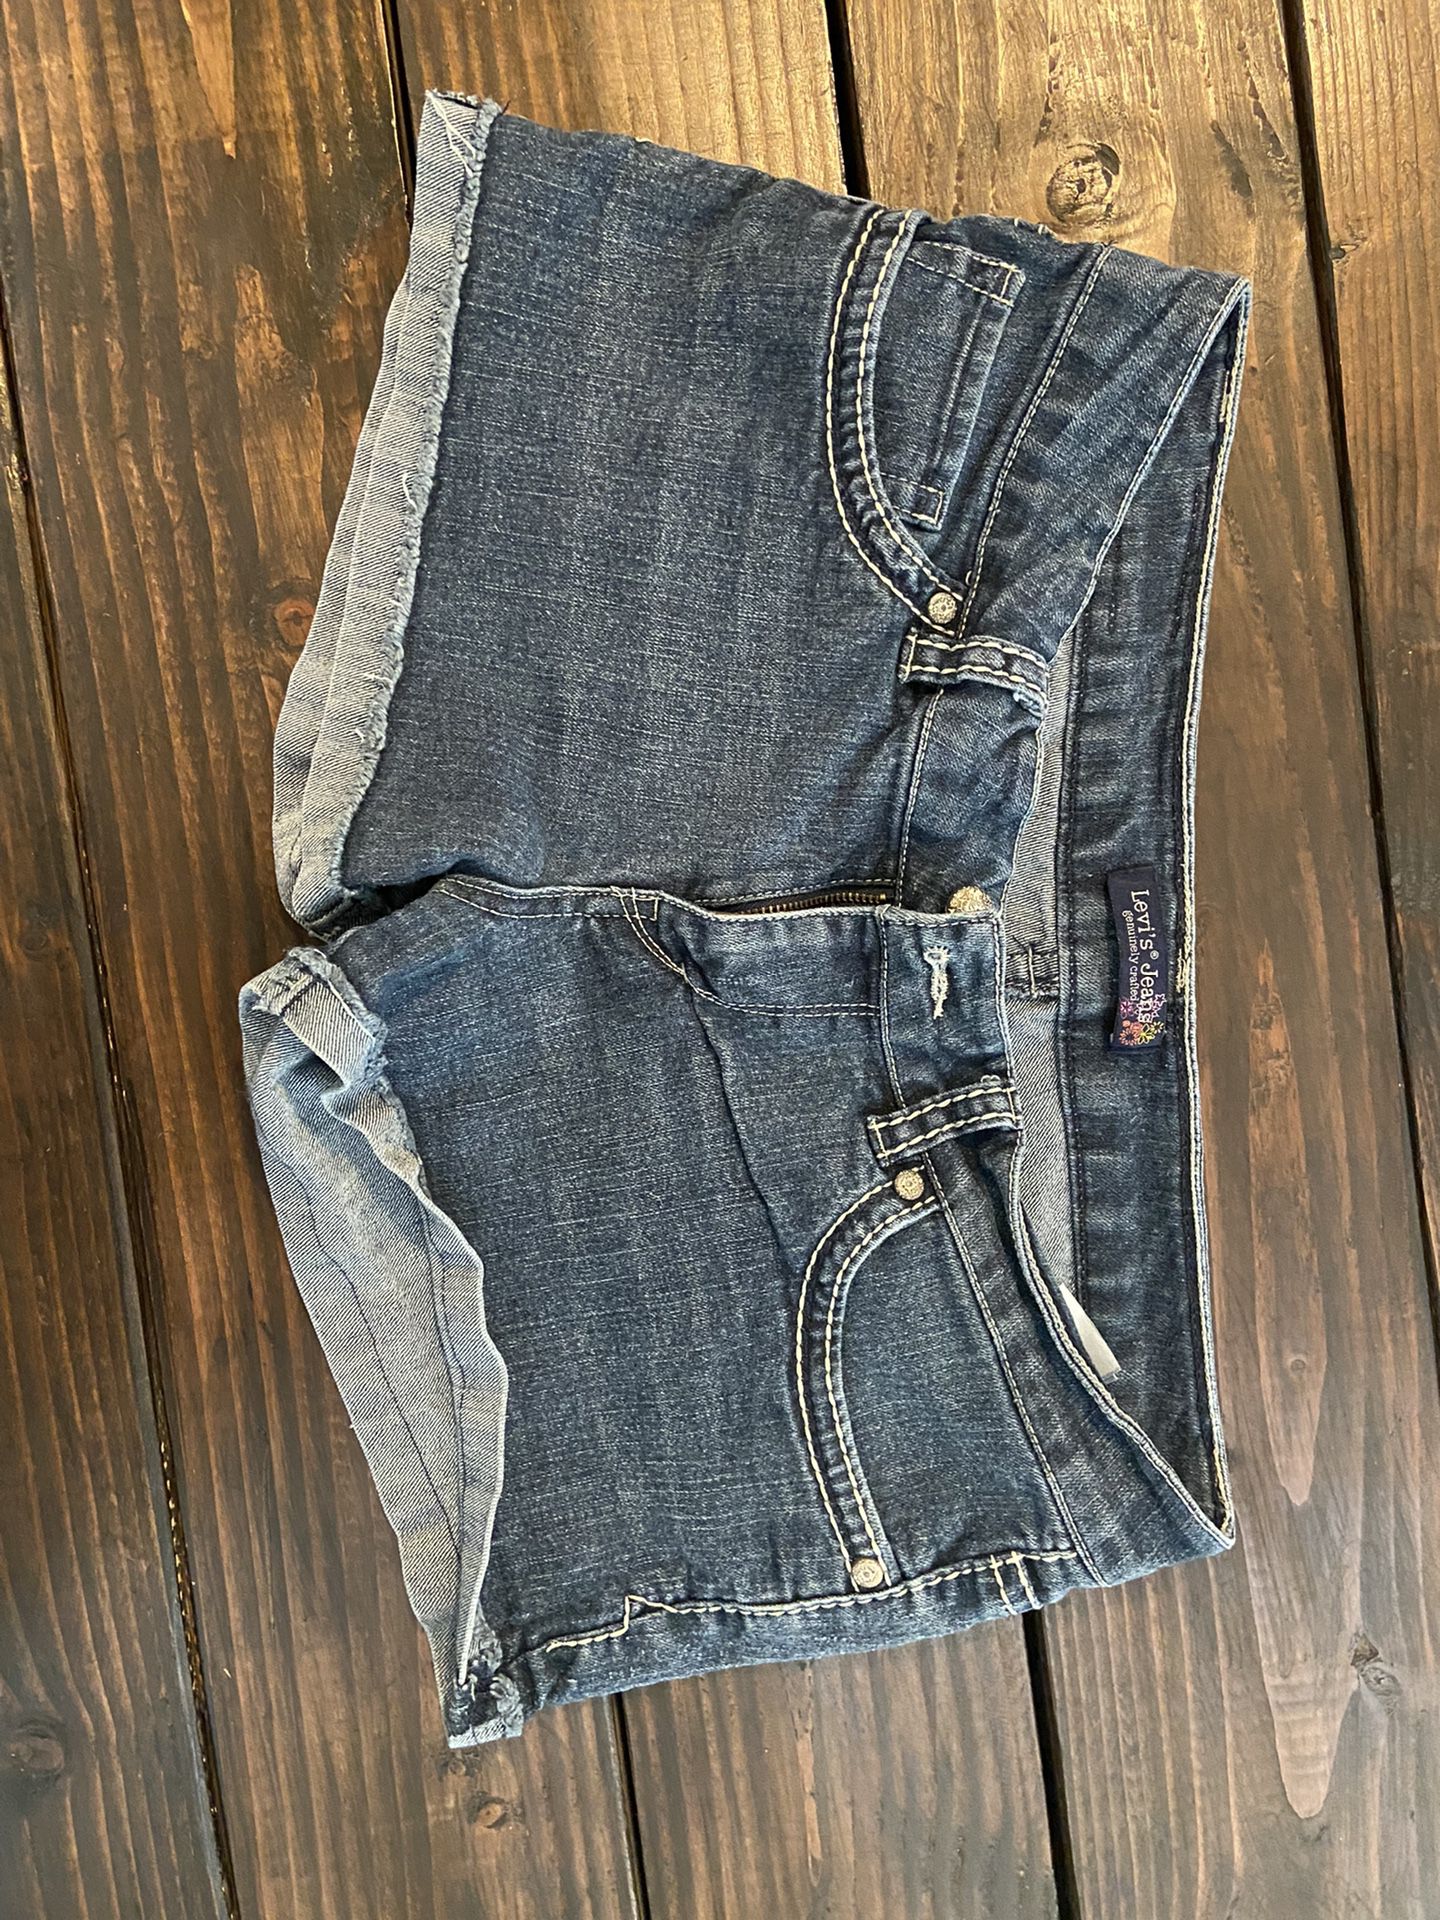 Womens Size 11 Levi Shorts for Sale in Brea, CA - OfferUp